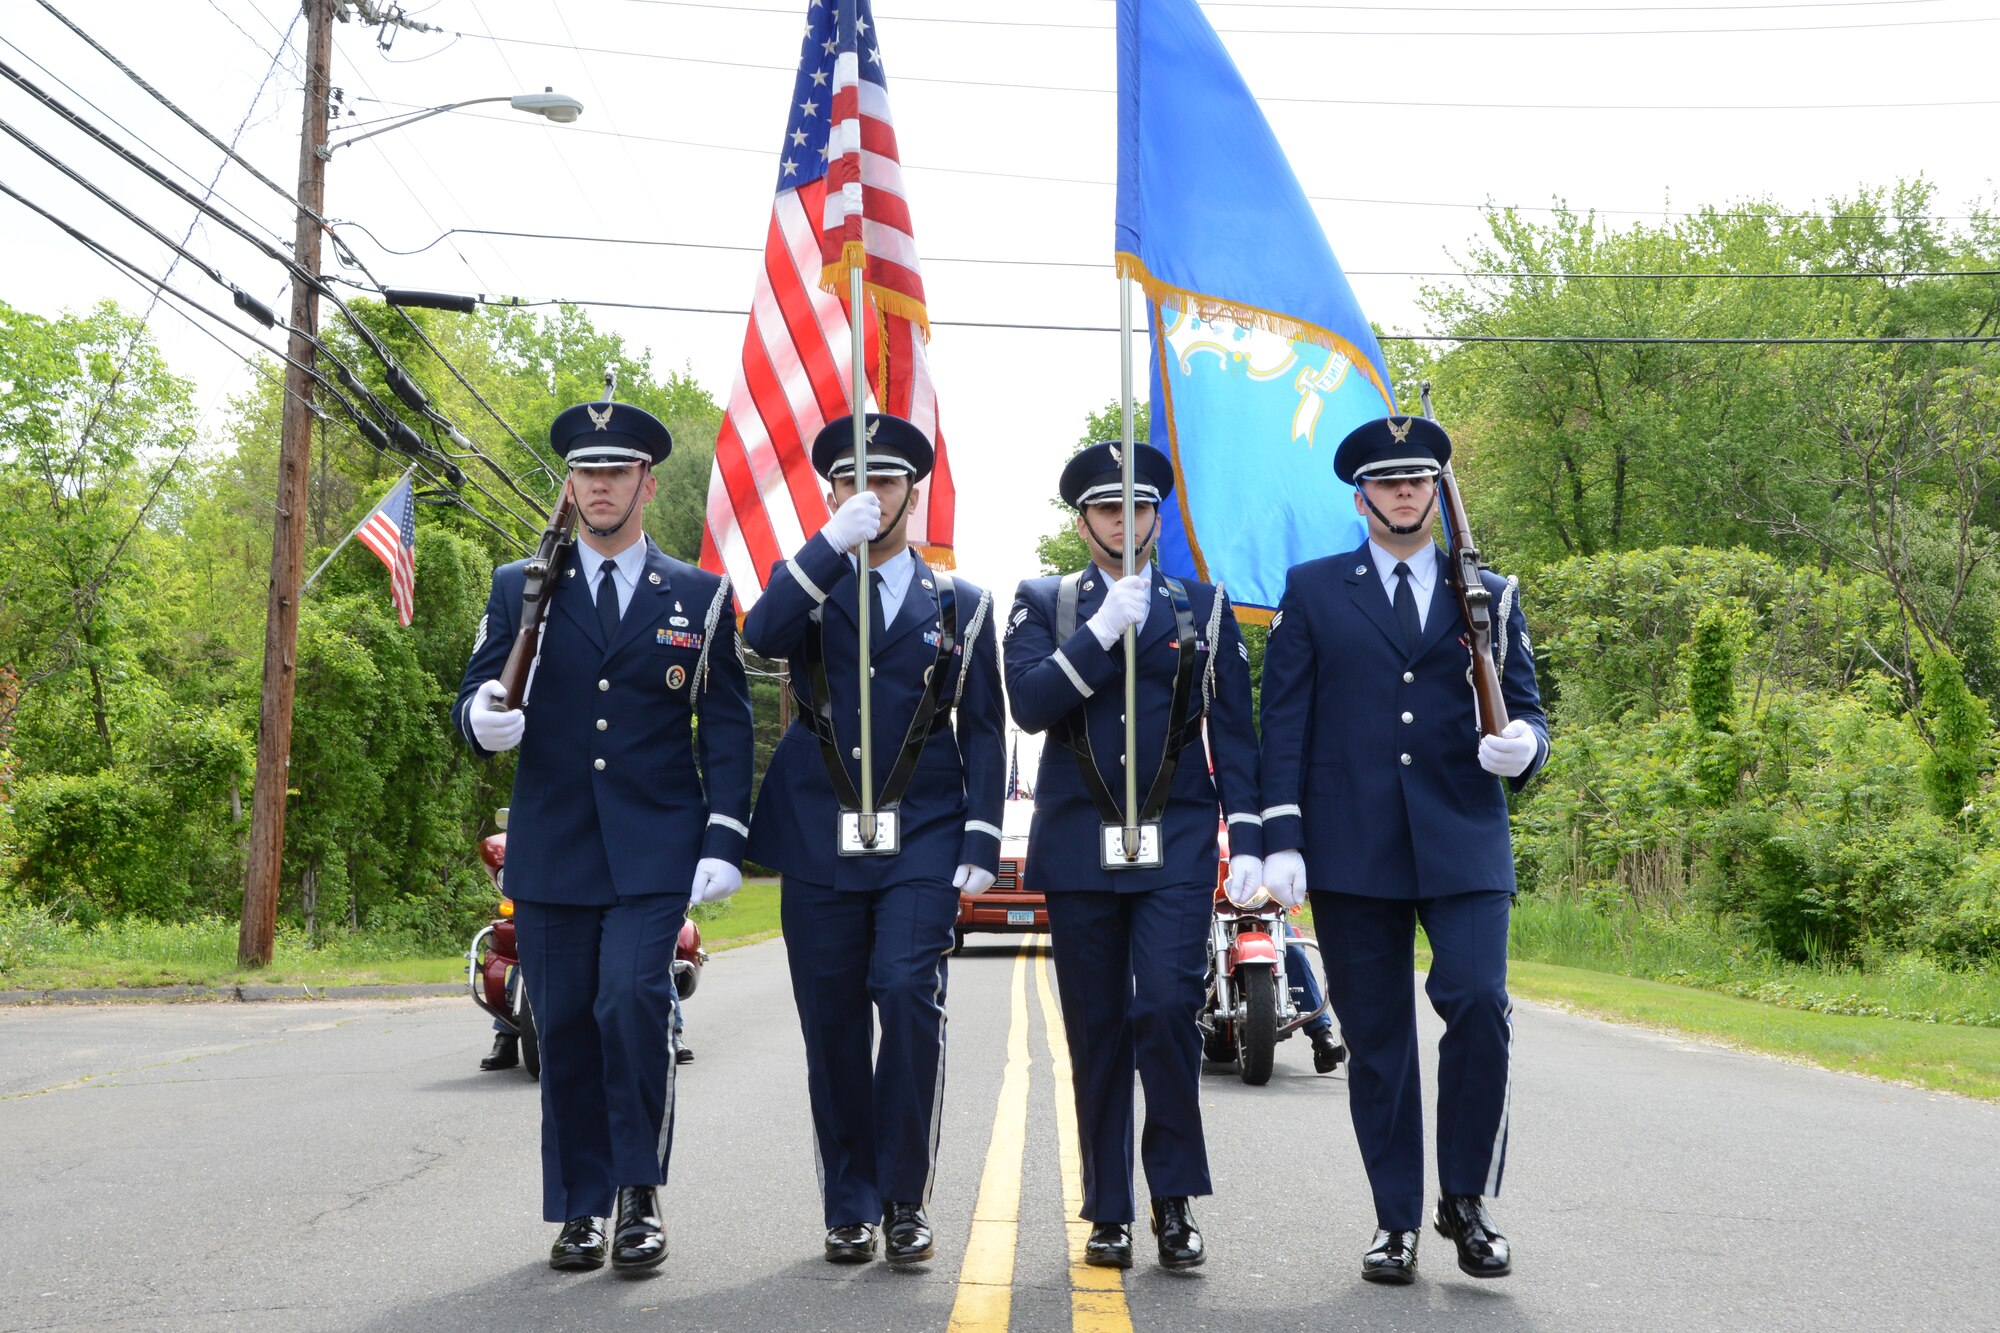 The 103rd Airlift Wing’s Base Honor Guard marches in the Memorial Day parade, East Granby, Conn., May 26, 2014.  (U.S. Air National Guard photo by Senior Airman Emmanuel Santiago)